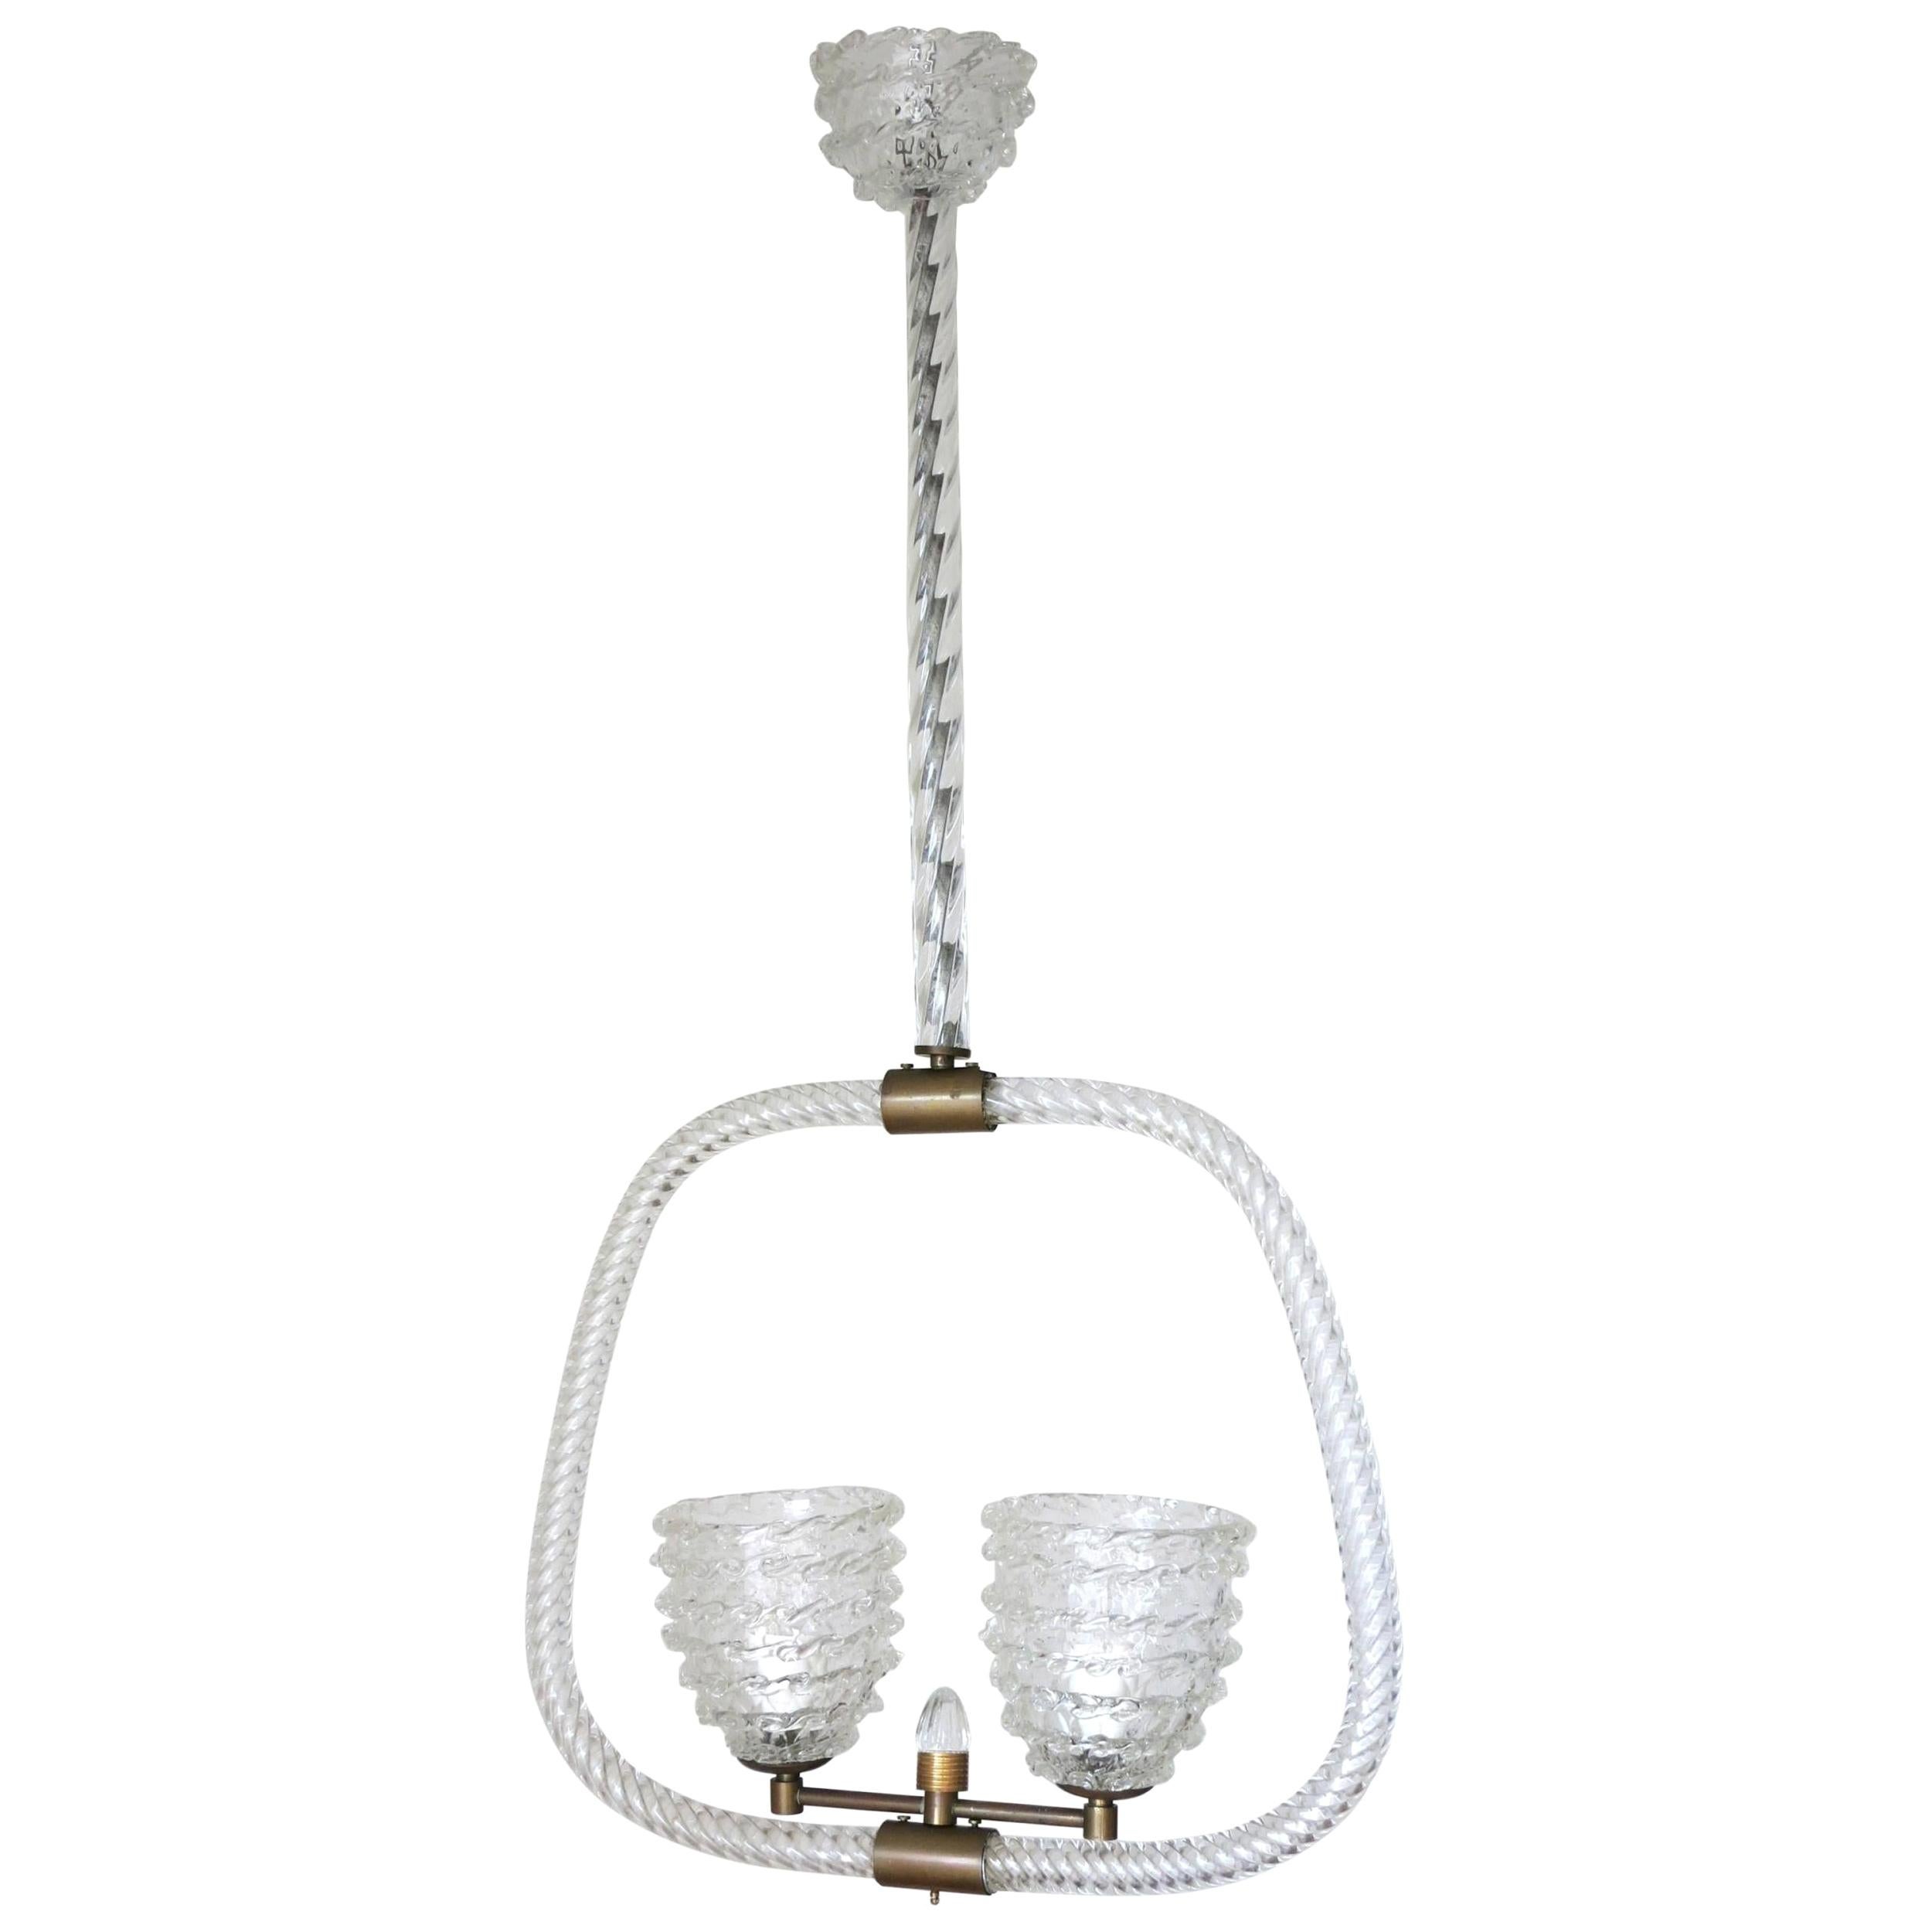 Vintage Italian Pendant Chandelier with Clear Murano Glass Ercole Barovier 1950s